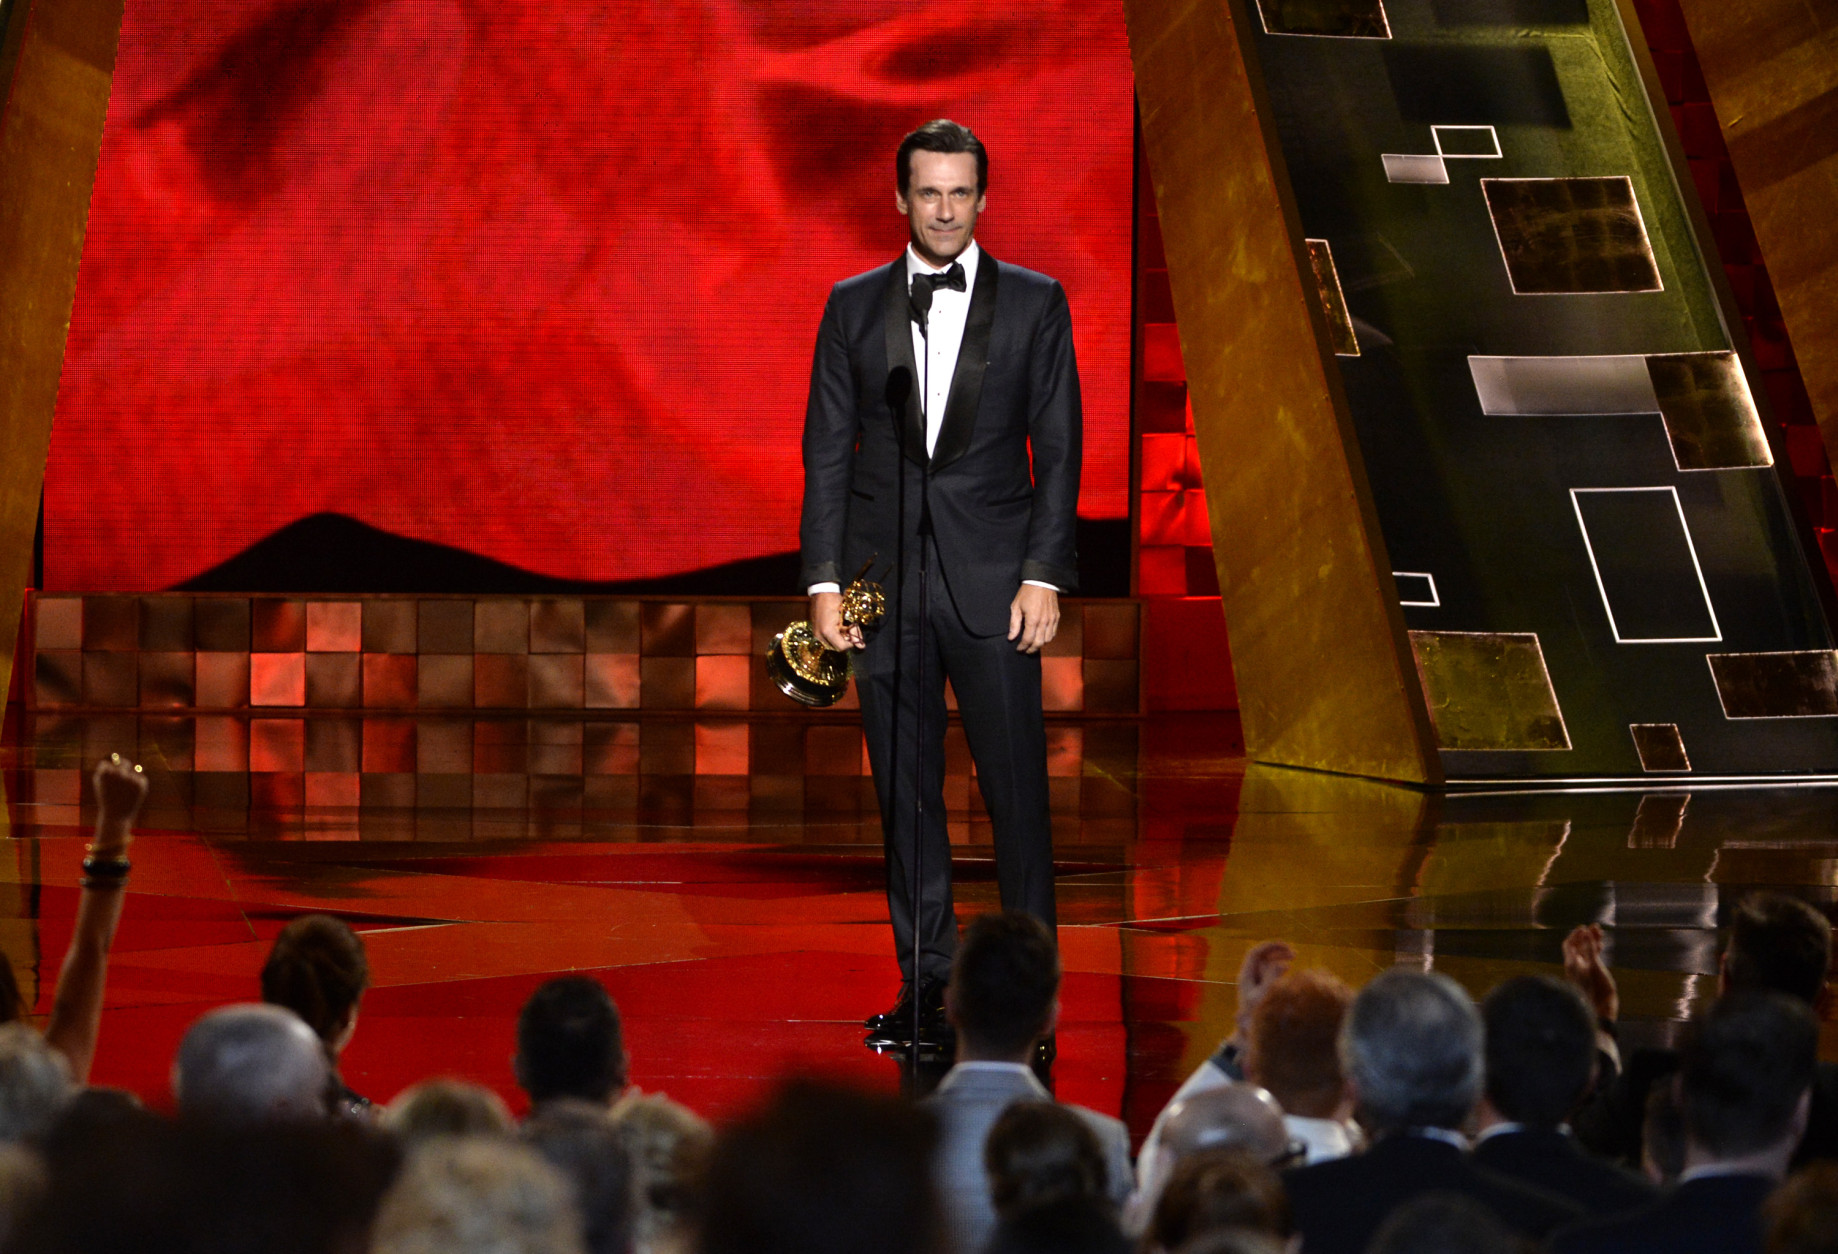 Jon Hamm accepts the award for outstanding lead actor in a drama series for Mad Men at the 67th Primetime Emmy Awards on Sunday, Sept. 20, 2015, at the Microsoft Theater in Los Angeles. (Photo by Phil McCarten/Invision for the Television Academy/AP Images)